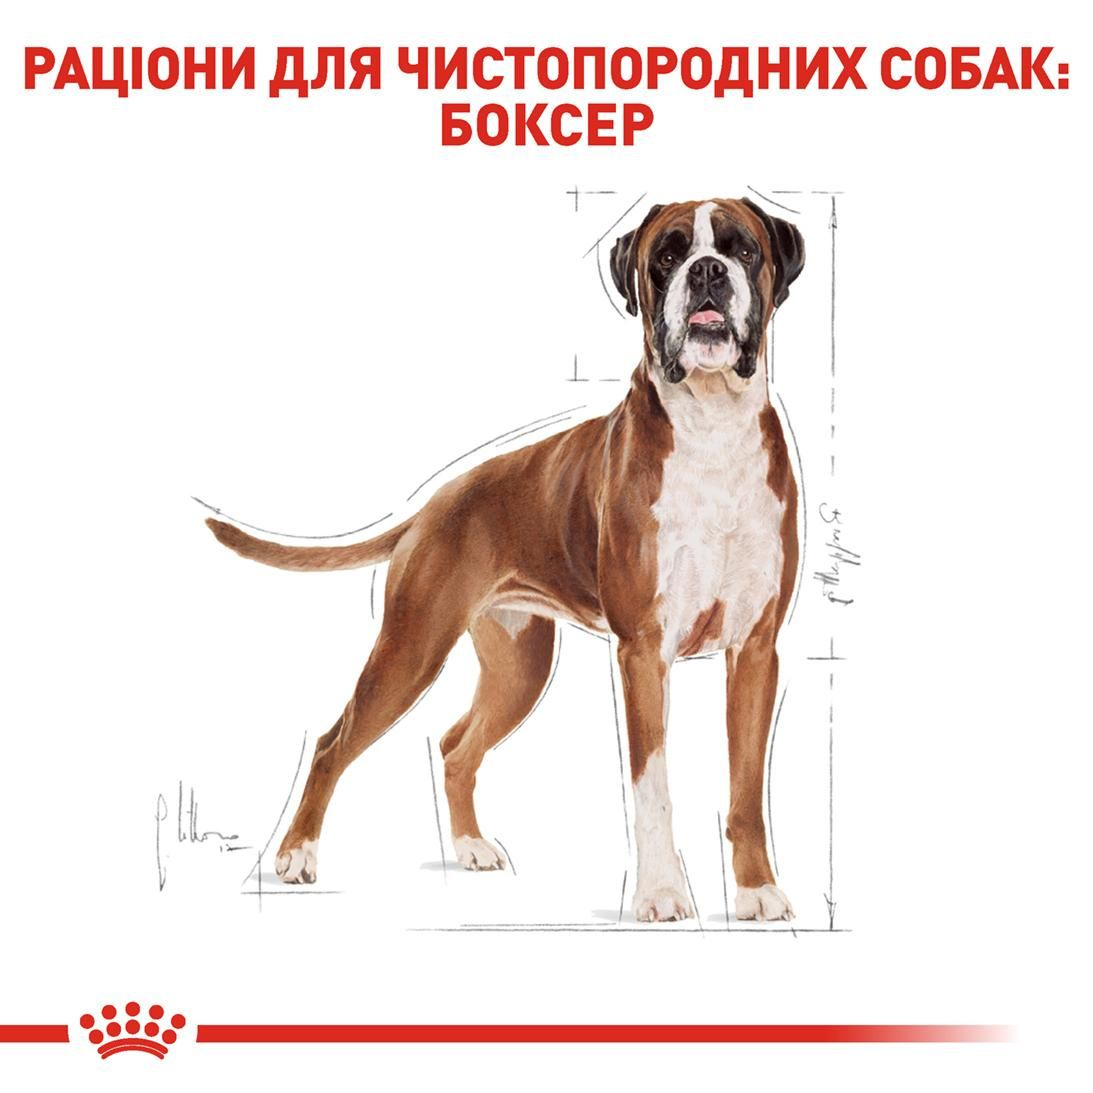 Boxer Adult